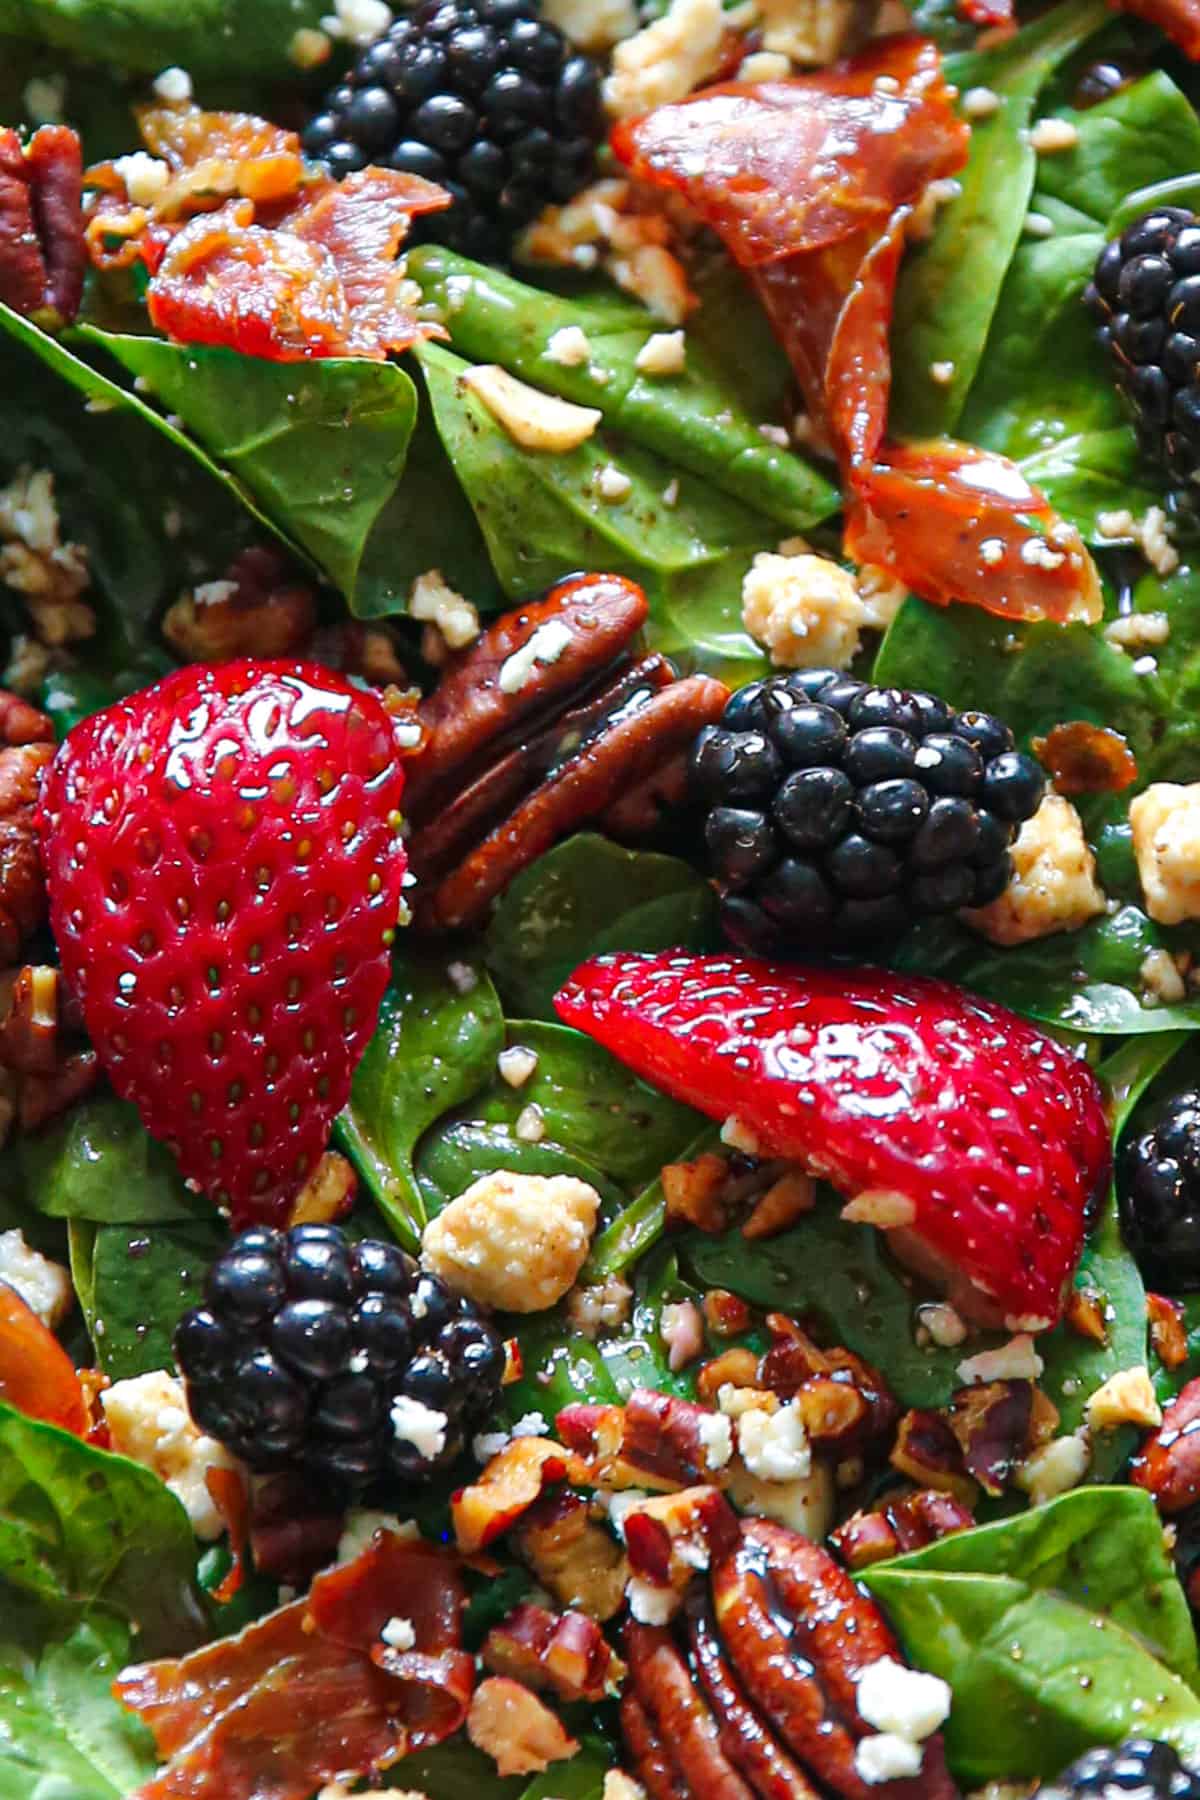 Berry spinach salad with strawberries, blackberries, feta cheese, pecans, crispy prosciutto, and balsamic glaze.